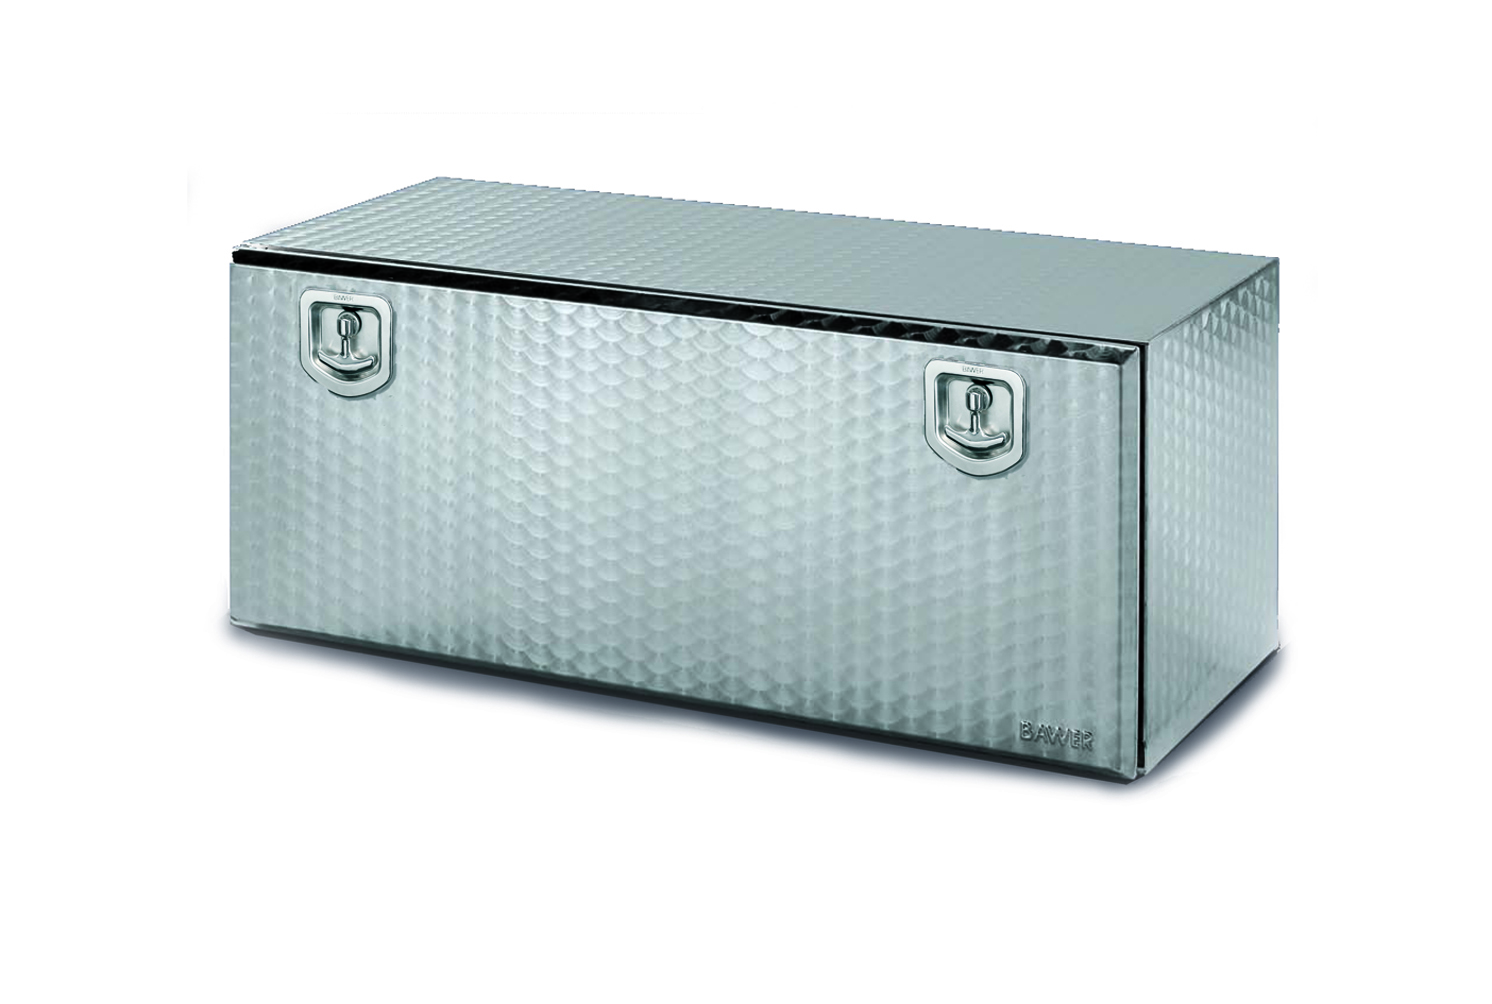 Bawer L1200 x H500 x D500mm Stainless Steel toolbox - Flowered Finish with S/S Locks